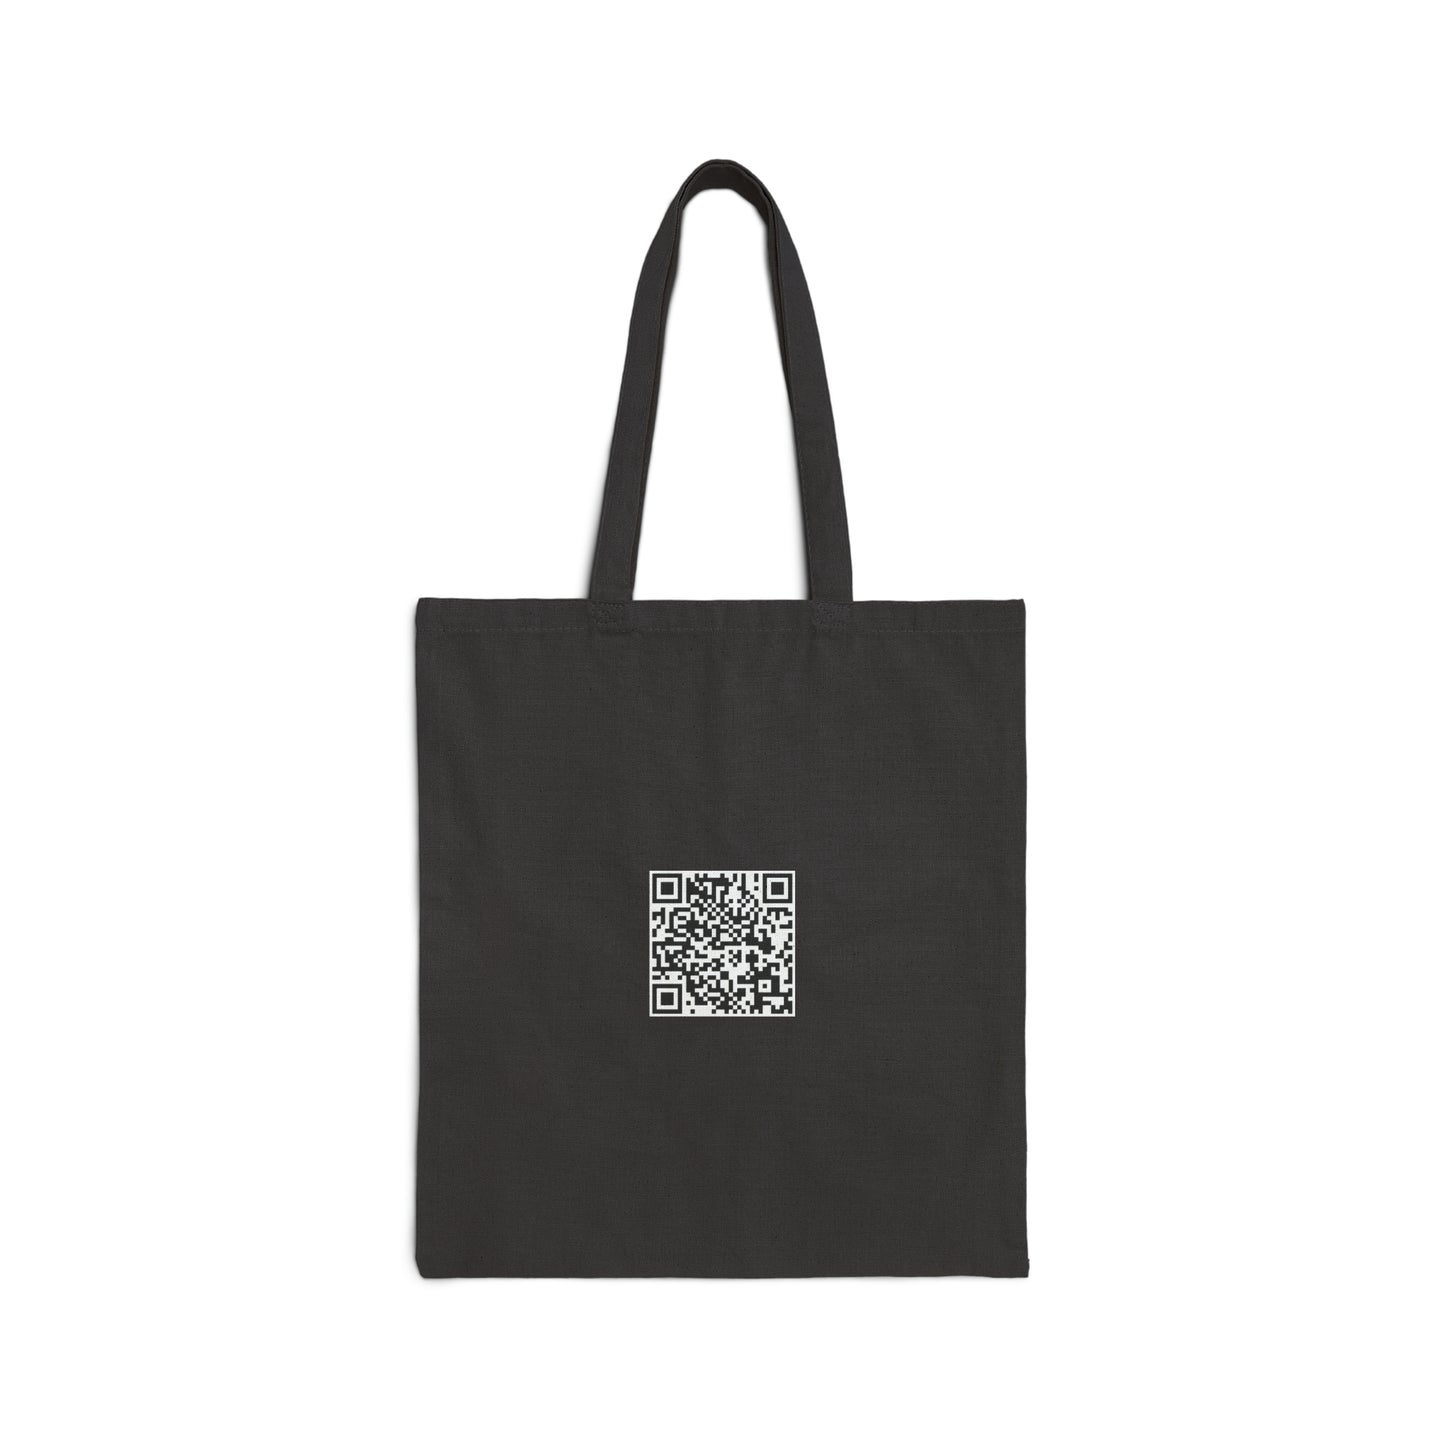 The Witch and the Watcher - Cotton Canvas Tote Bag